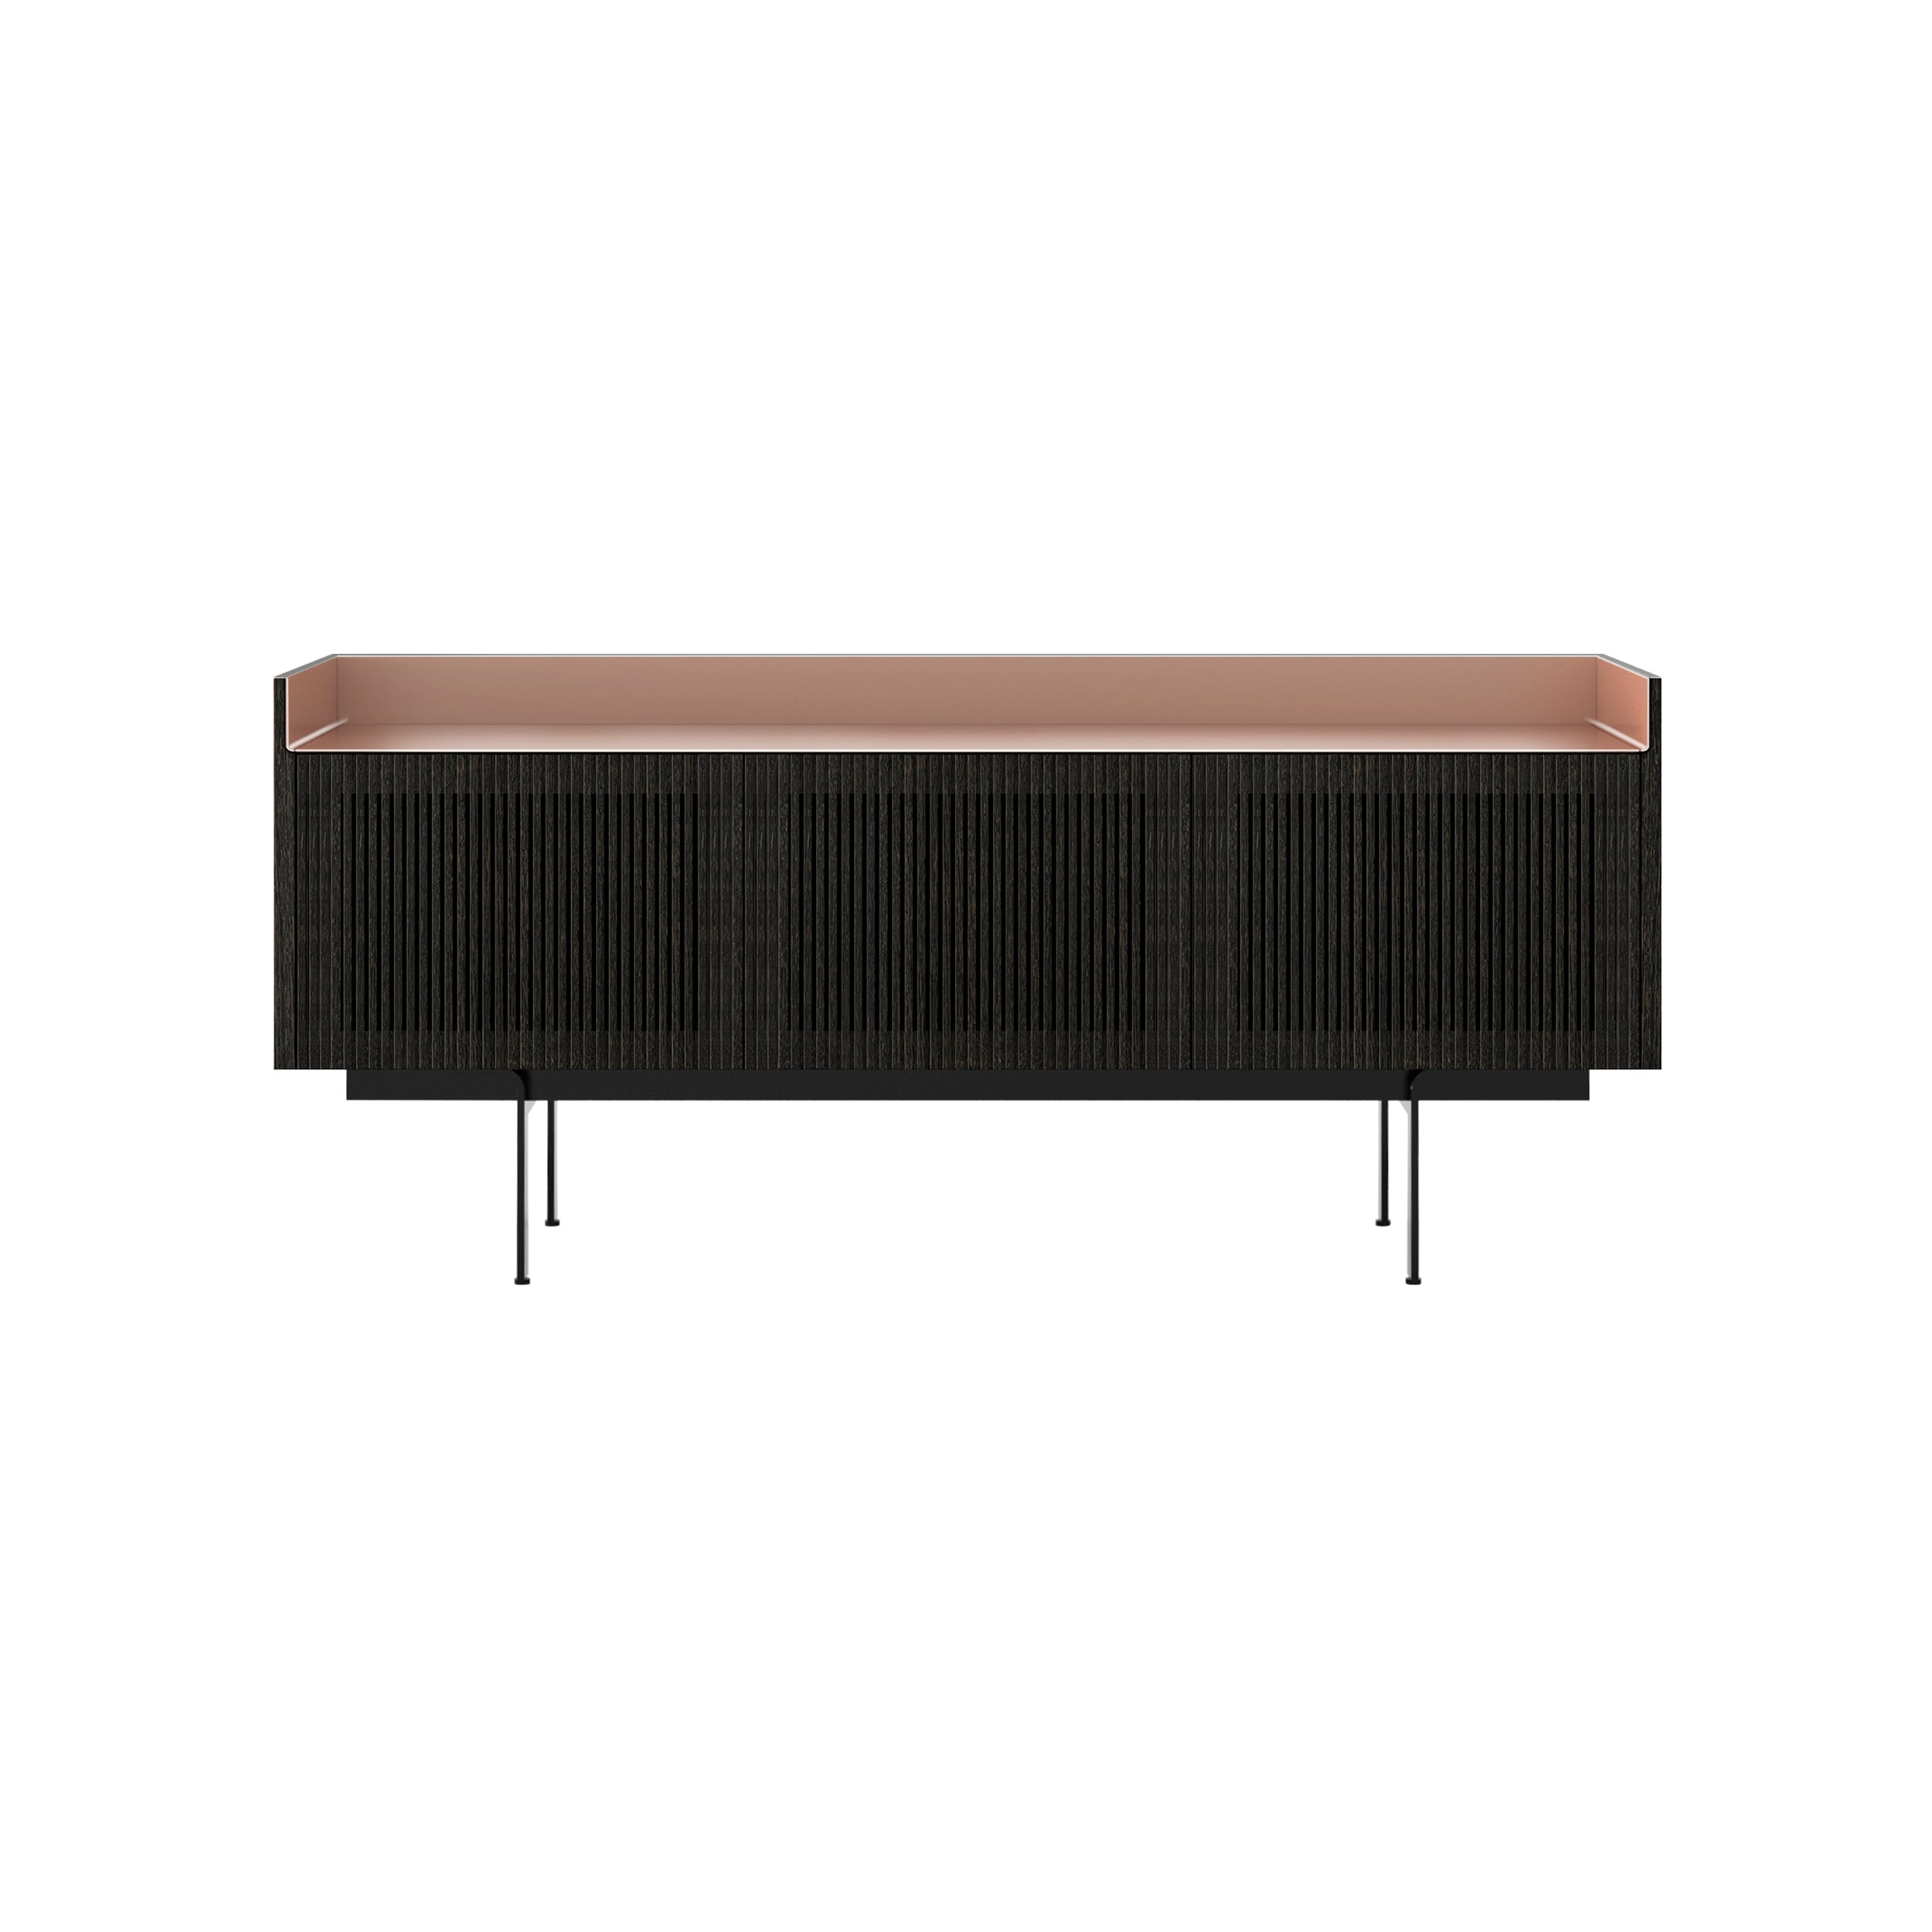 Stockholm Technic Sideboard: STH304 + Dark Grey Stained Oak + Anodized Aluminum Pale Rose + Black